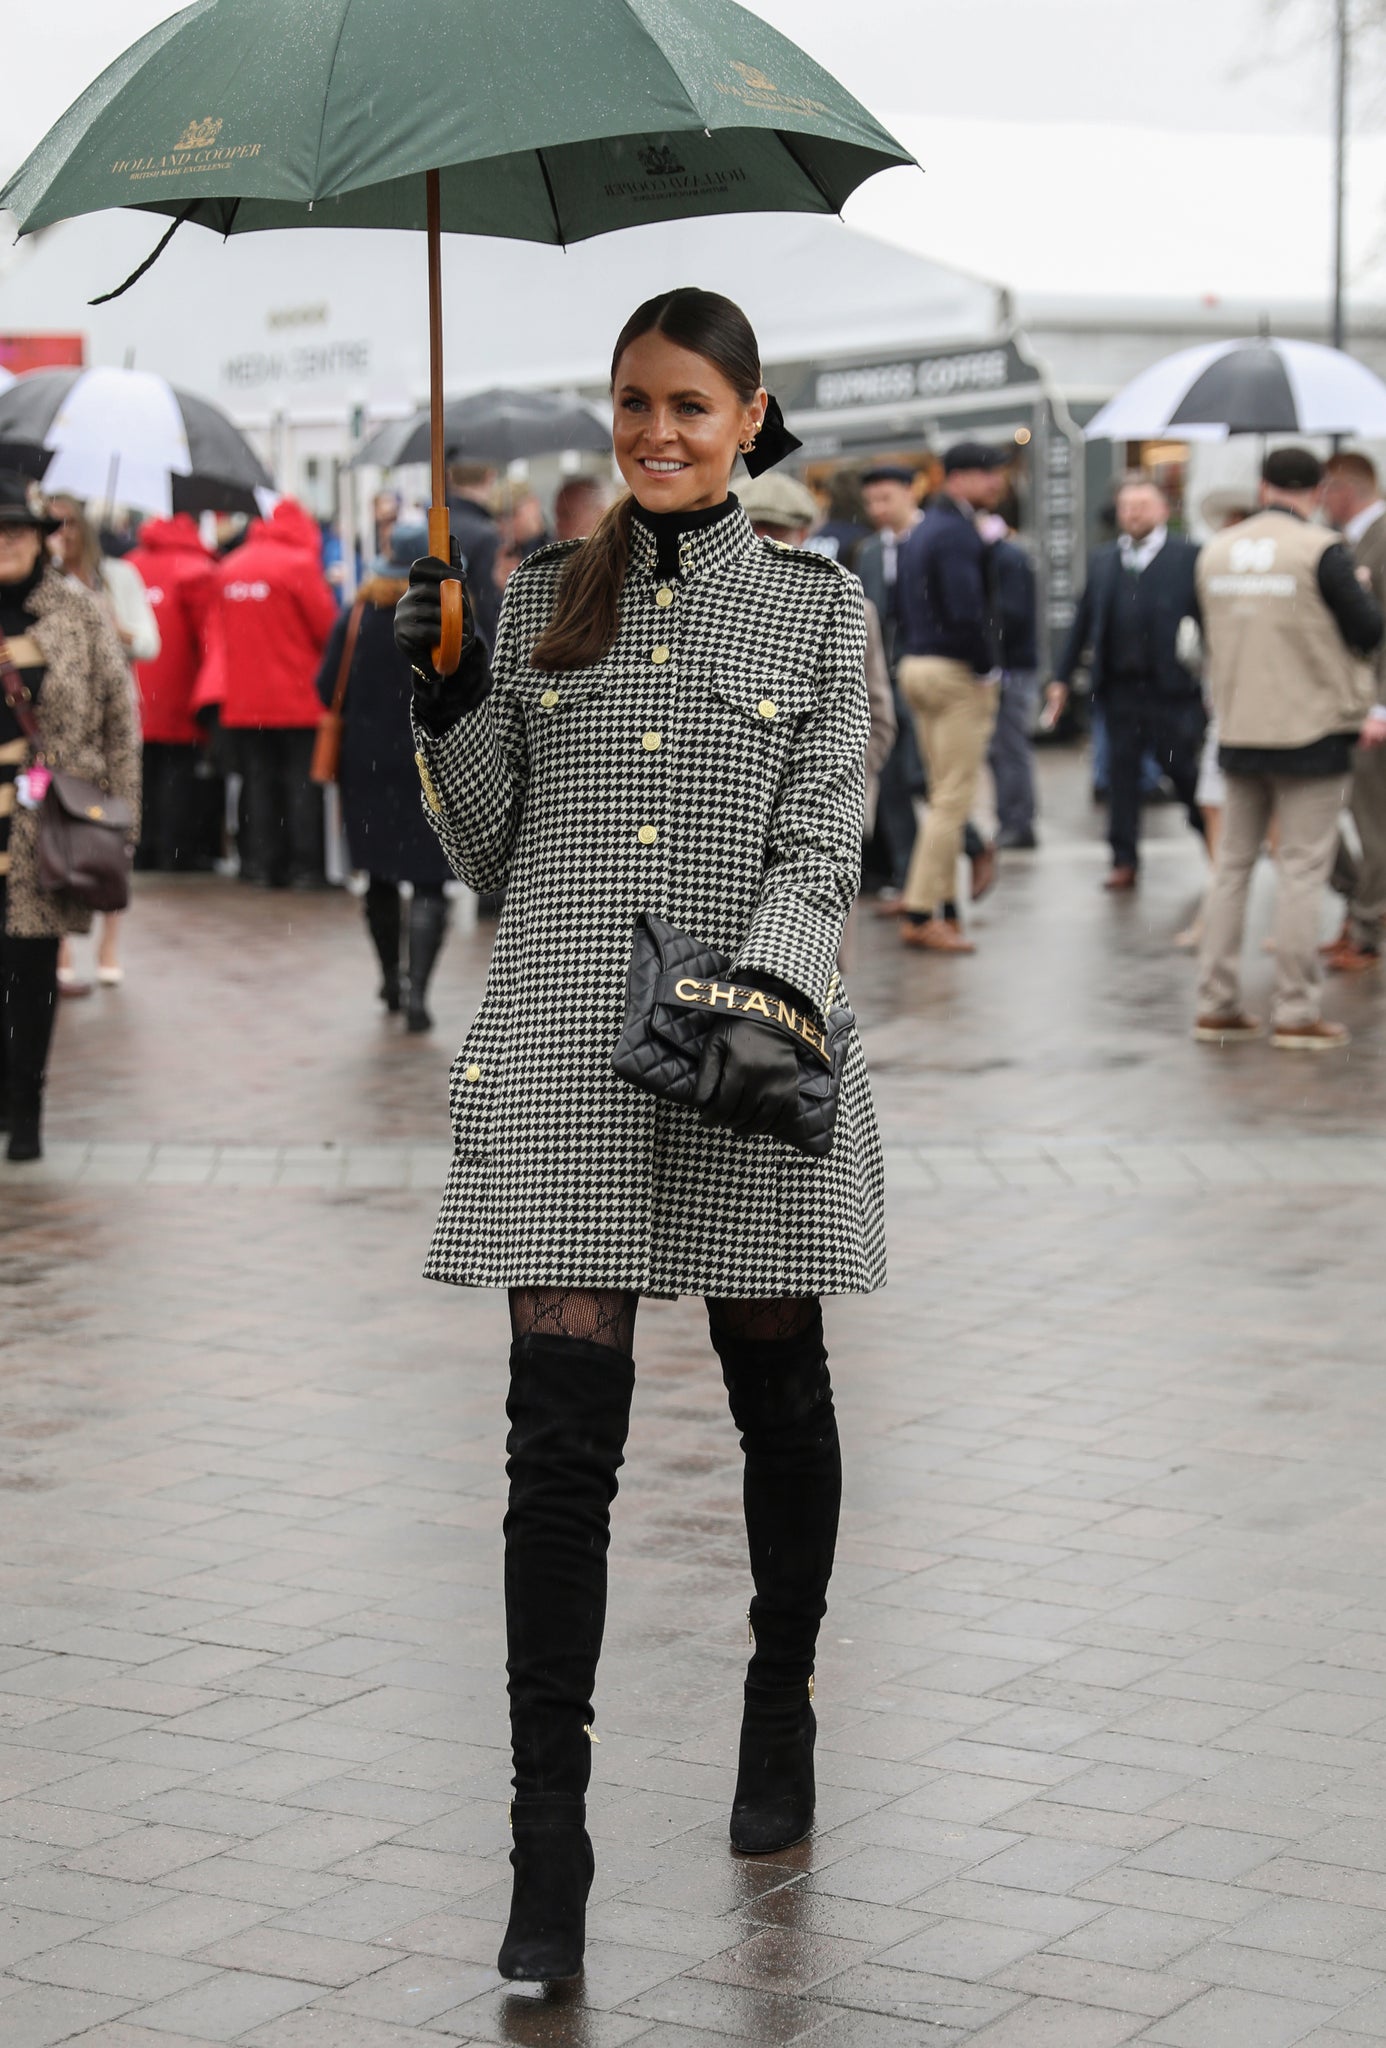 Jade Holland Cooper, owner of Holland Cooper in Womens black and white houndstooth front buttoned tweed cape coat